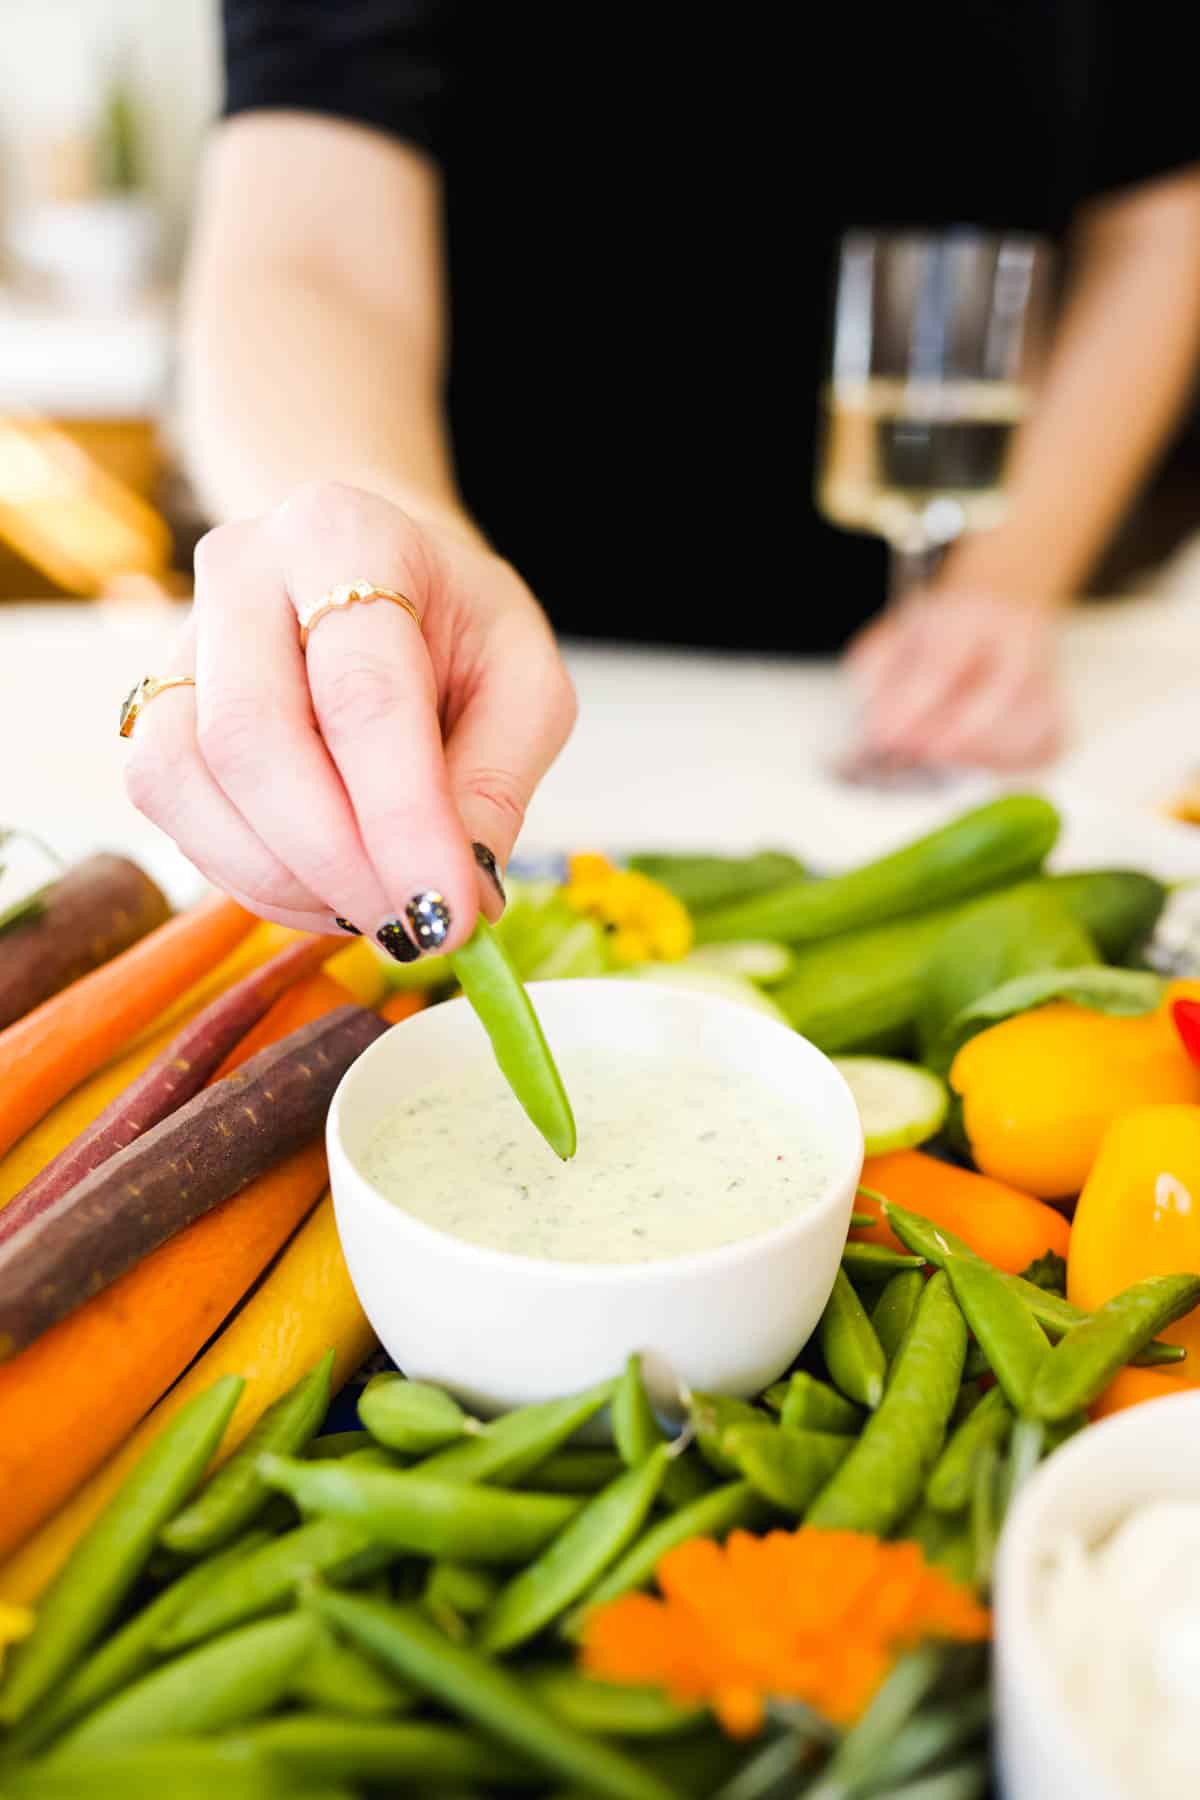 A woman dipping fresh vegetables in green dip.